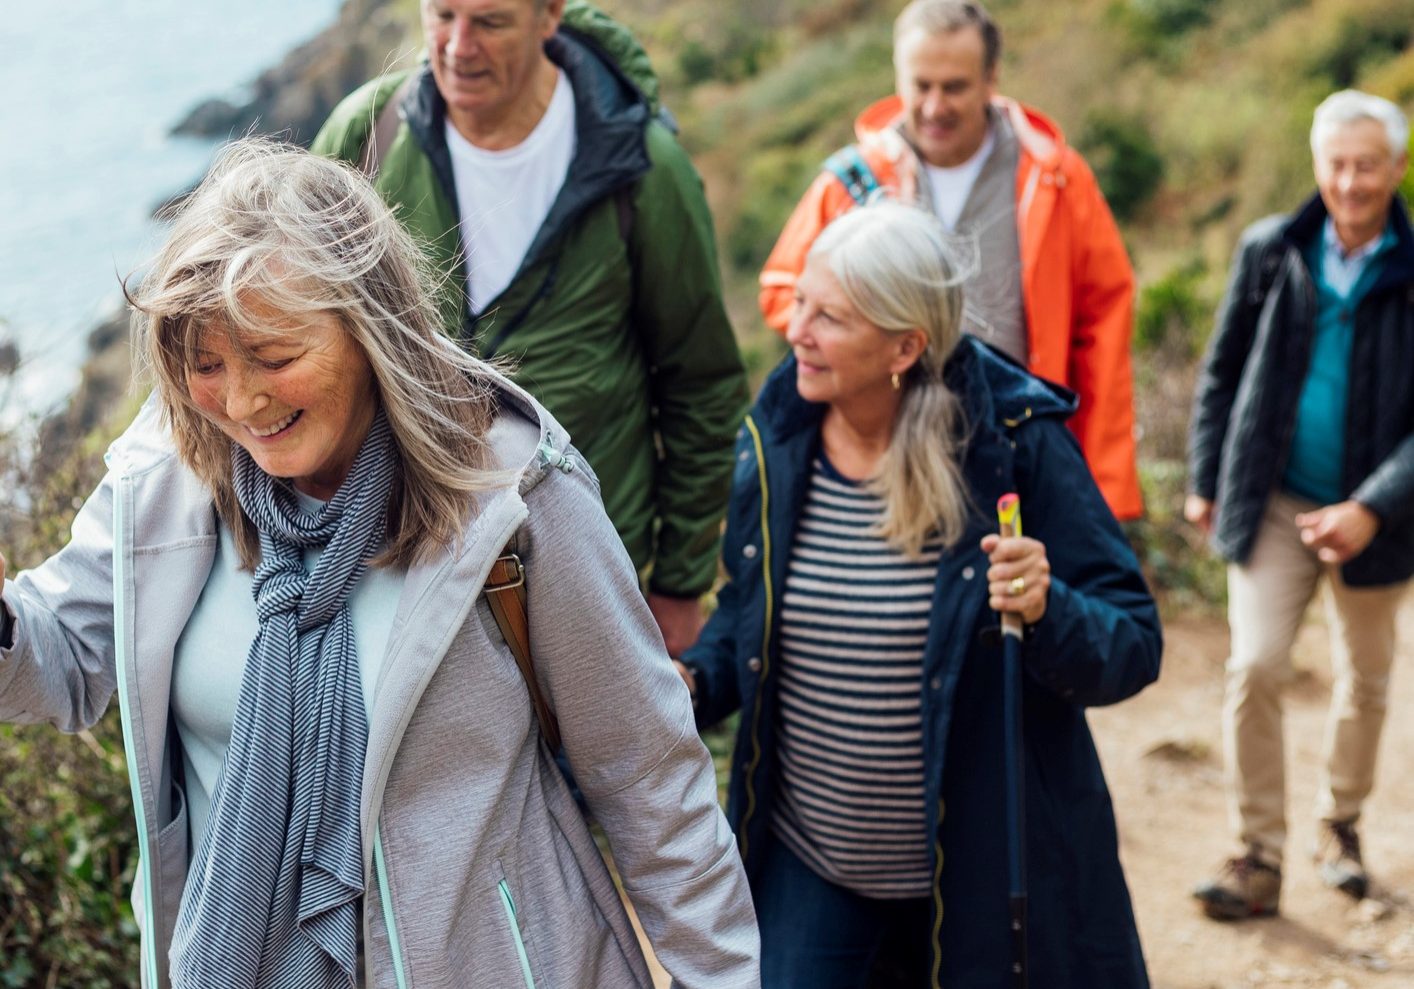 A group of male and female friends walking up a hill on a coastal path along a cliff edge overlooking the sea in Cornwall. The main focus is one woman wearing a jacket and scarf, she is smiling while looking down.